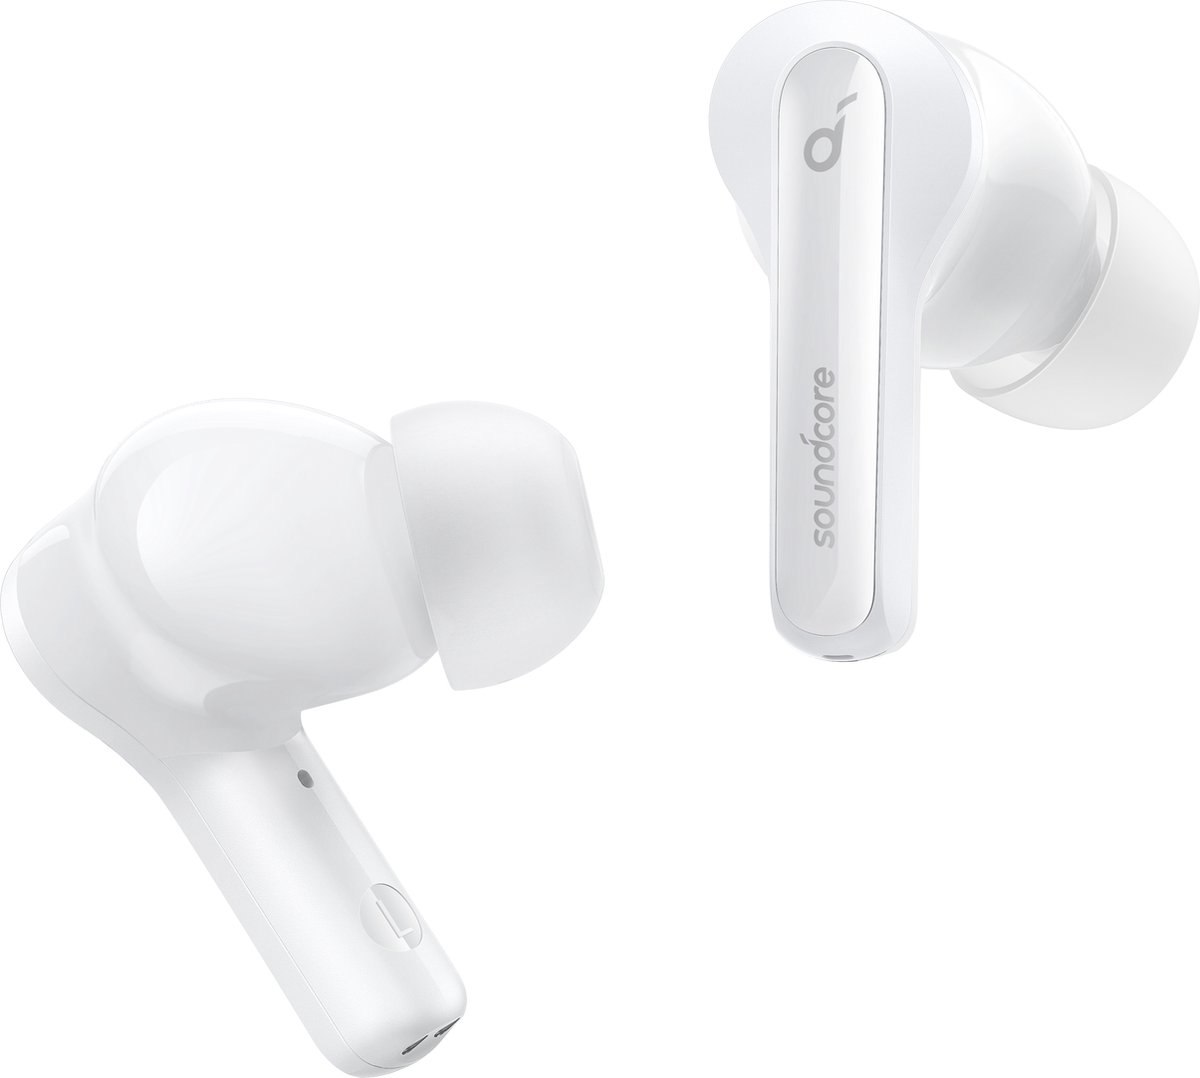 soundcore Note 3i - Noise Cancelling Earbuds with 4 Mic (White) - AI-Enhanced Calls - 10mm Oversized Drivers - Soundcore App for Custom EQ - 36H Playtime